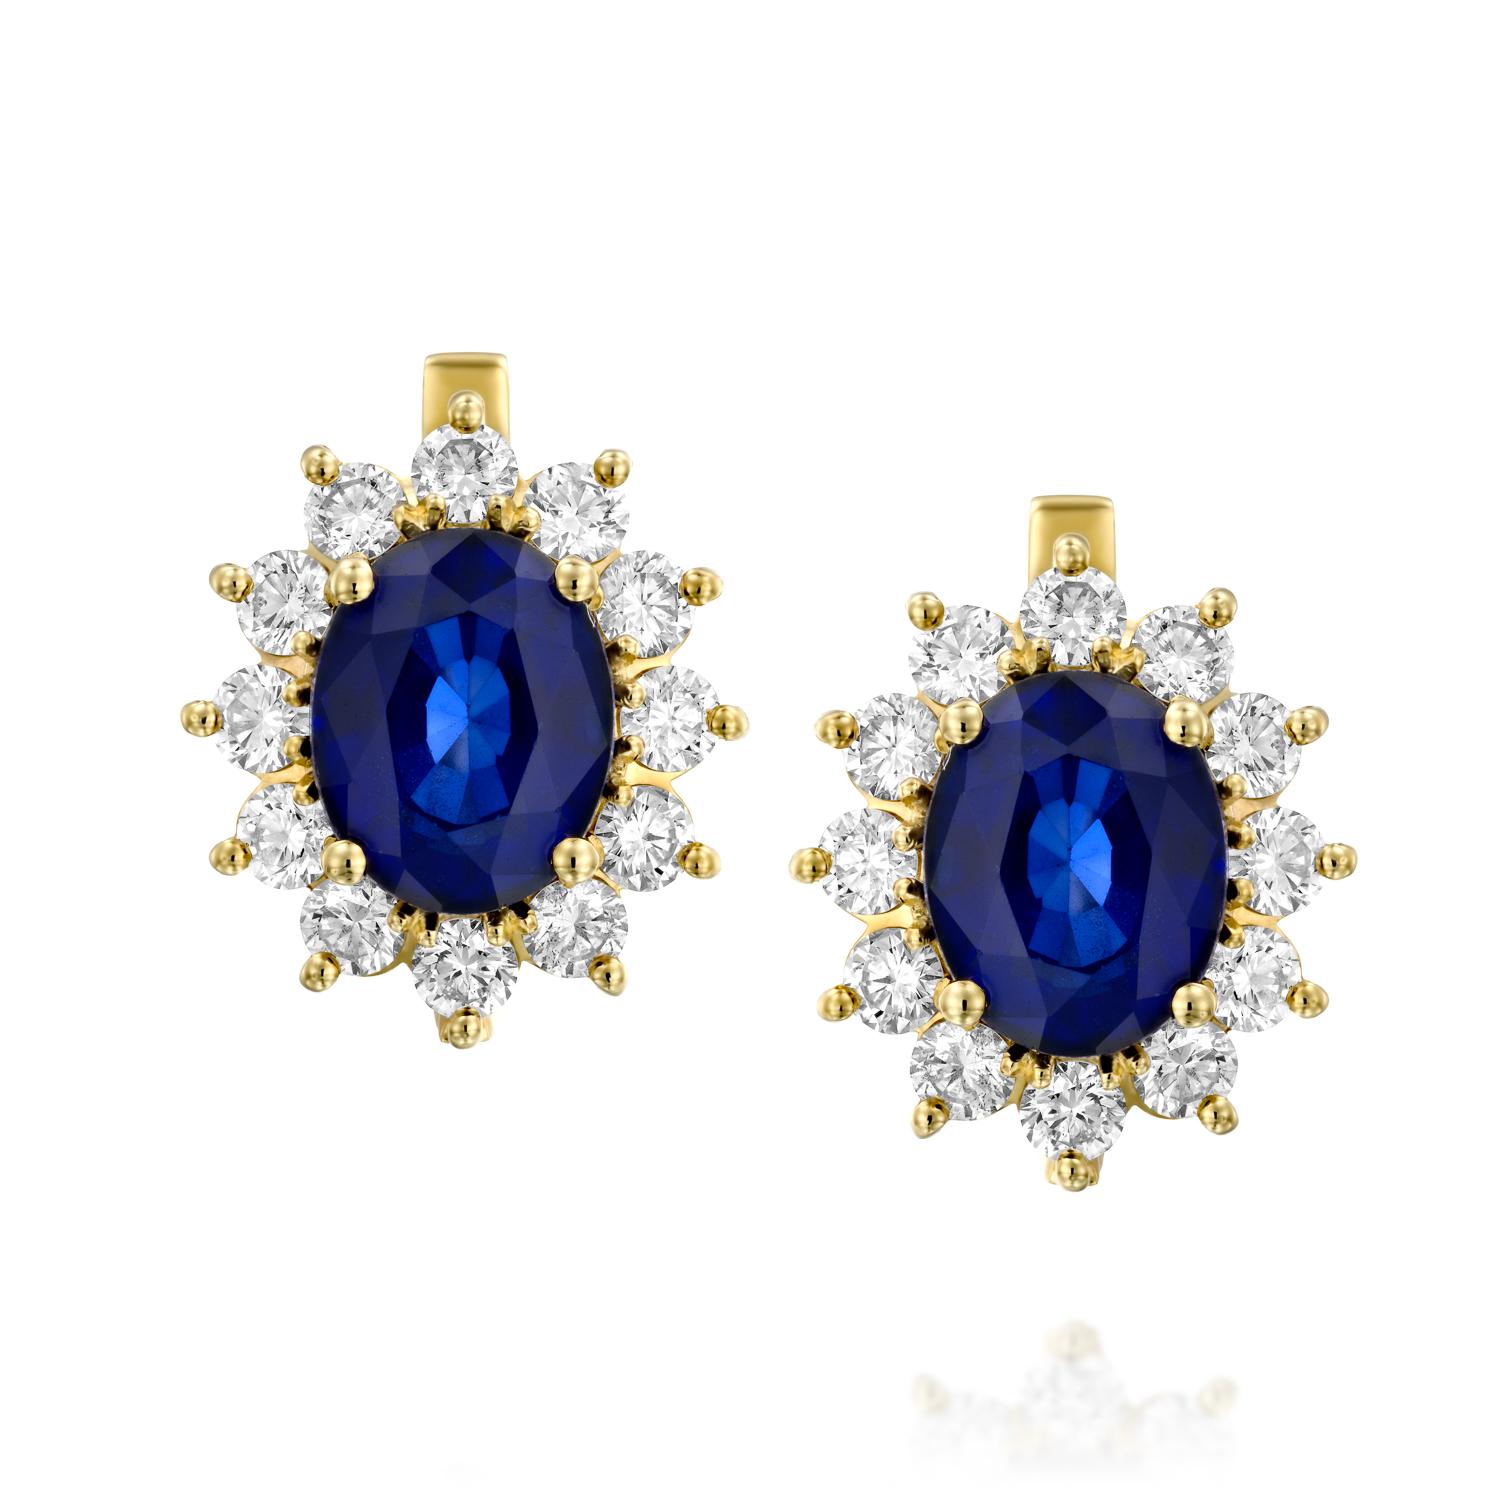 Lady Diana Sapphire Diamond Earrings - A Timeless Tribute to Elegance and Royalty

Indulge in the regal elegance and timeless beauty of the Lady Diana Sapphire Diamond Earrings, inspired by the iconic style of the beloved Princess Diana. These